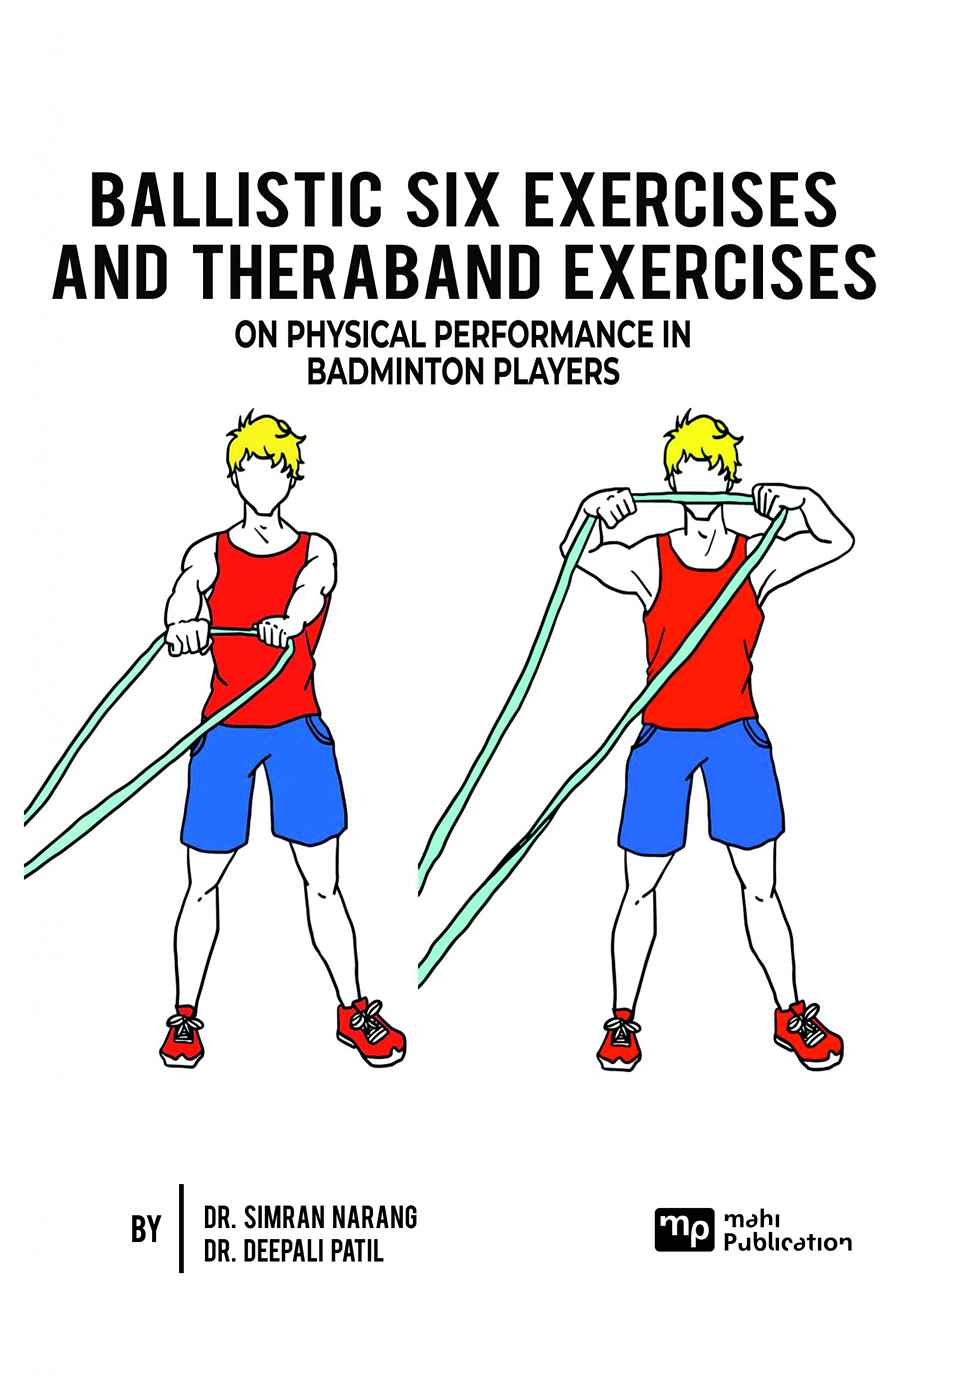 Ballistic Six Exercises and Theraband Exercises on Physical Performance in Badminton Players